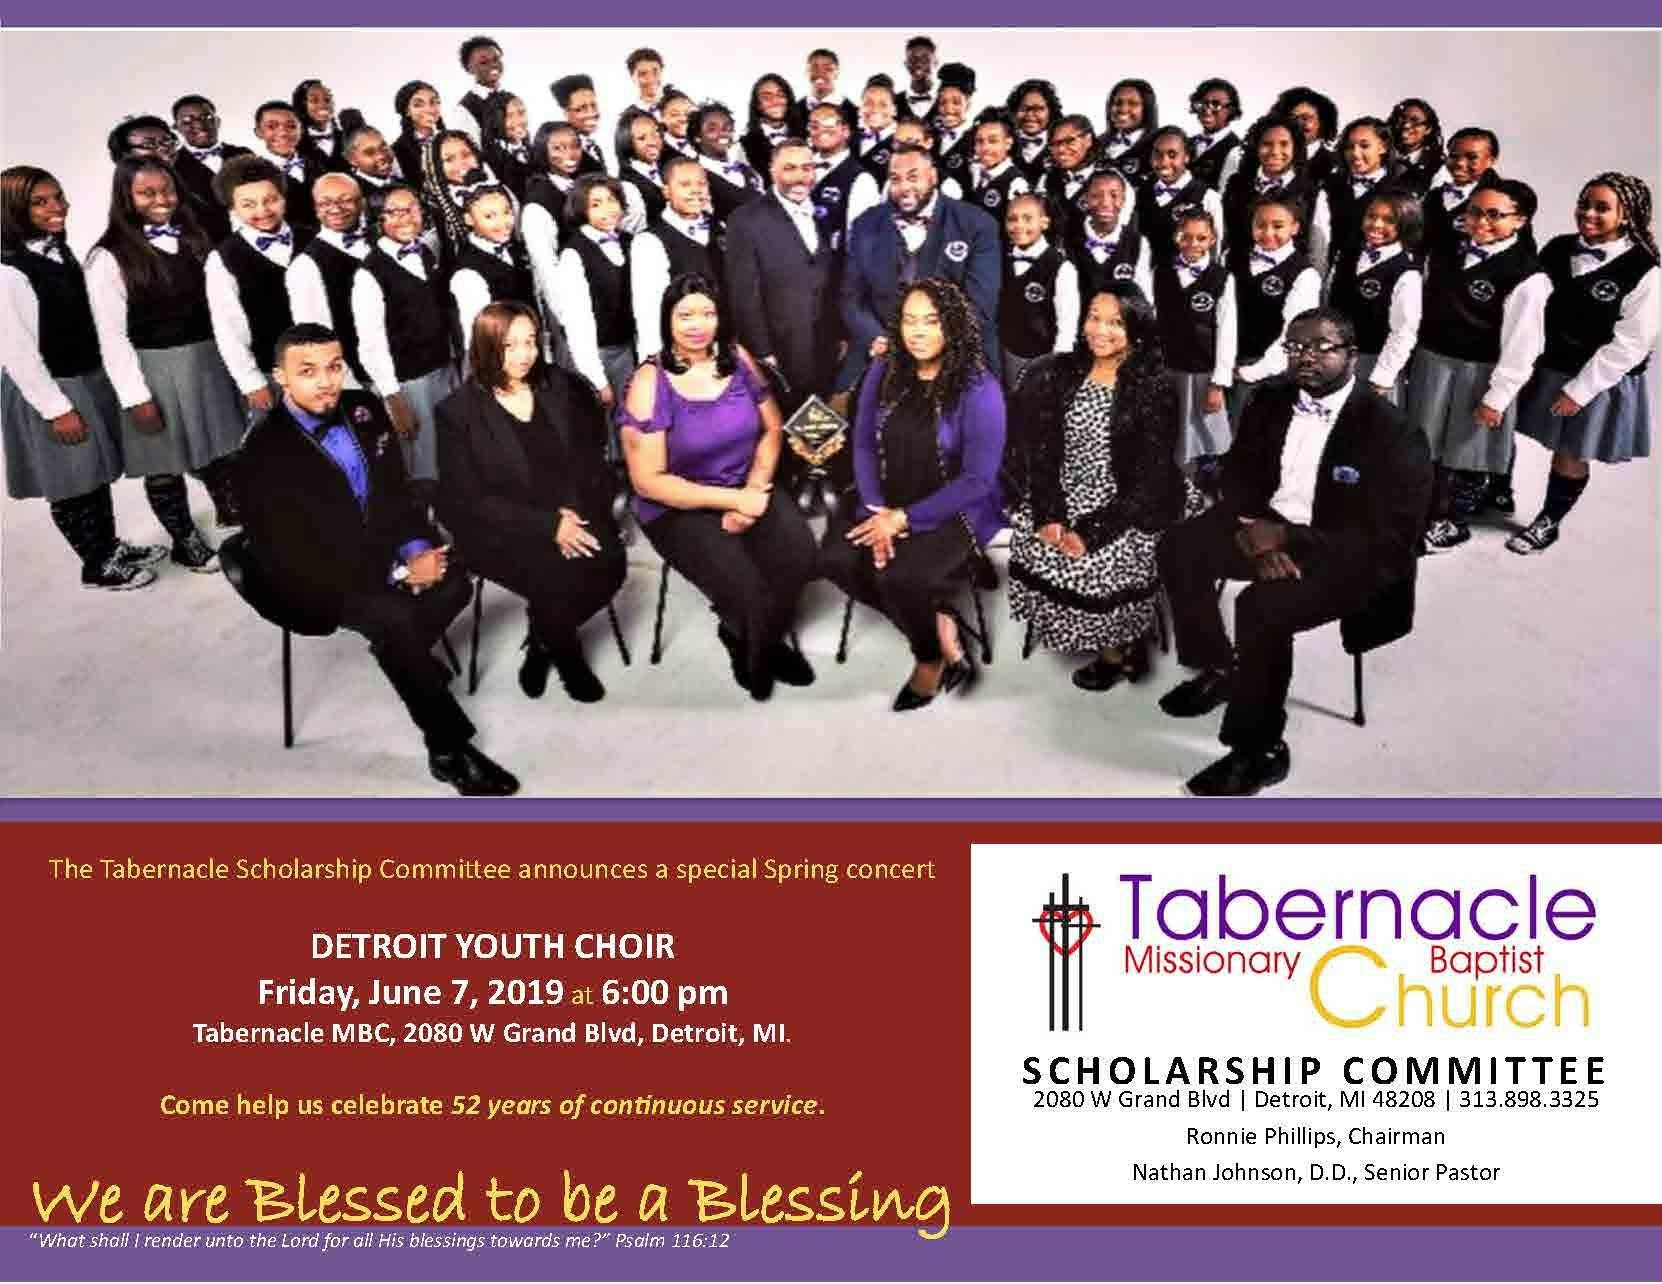 Tabernacle Scholarship Committee presents a Benefit Concert